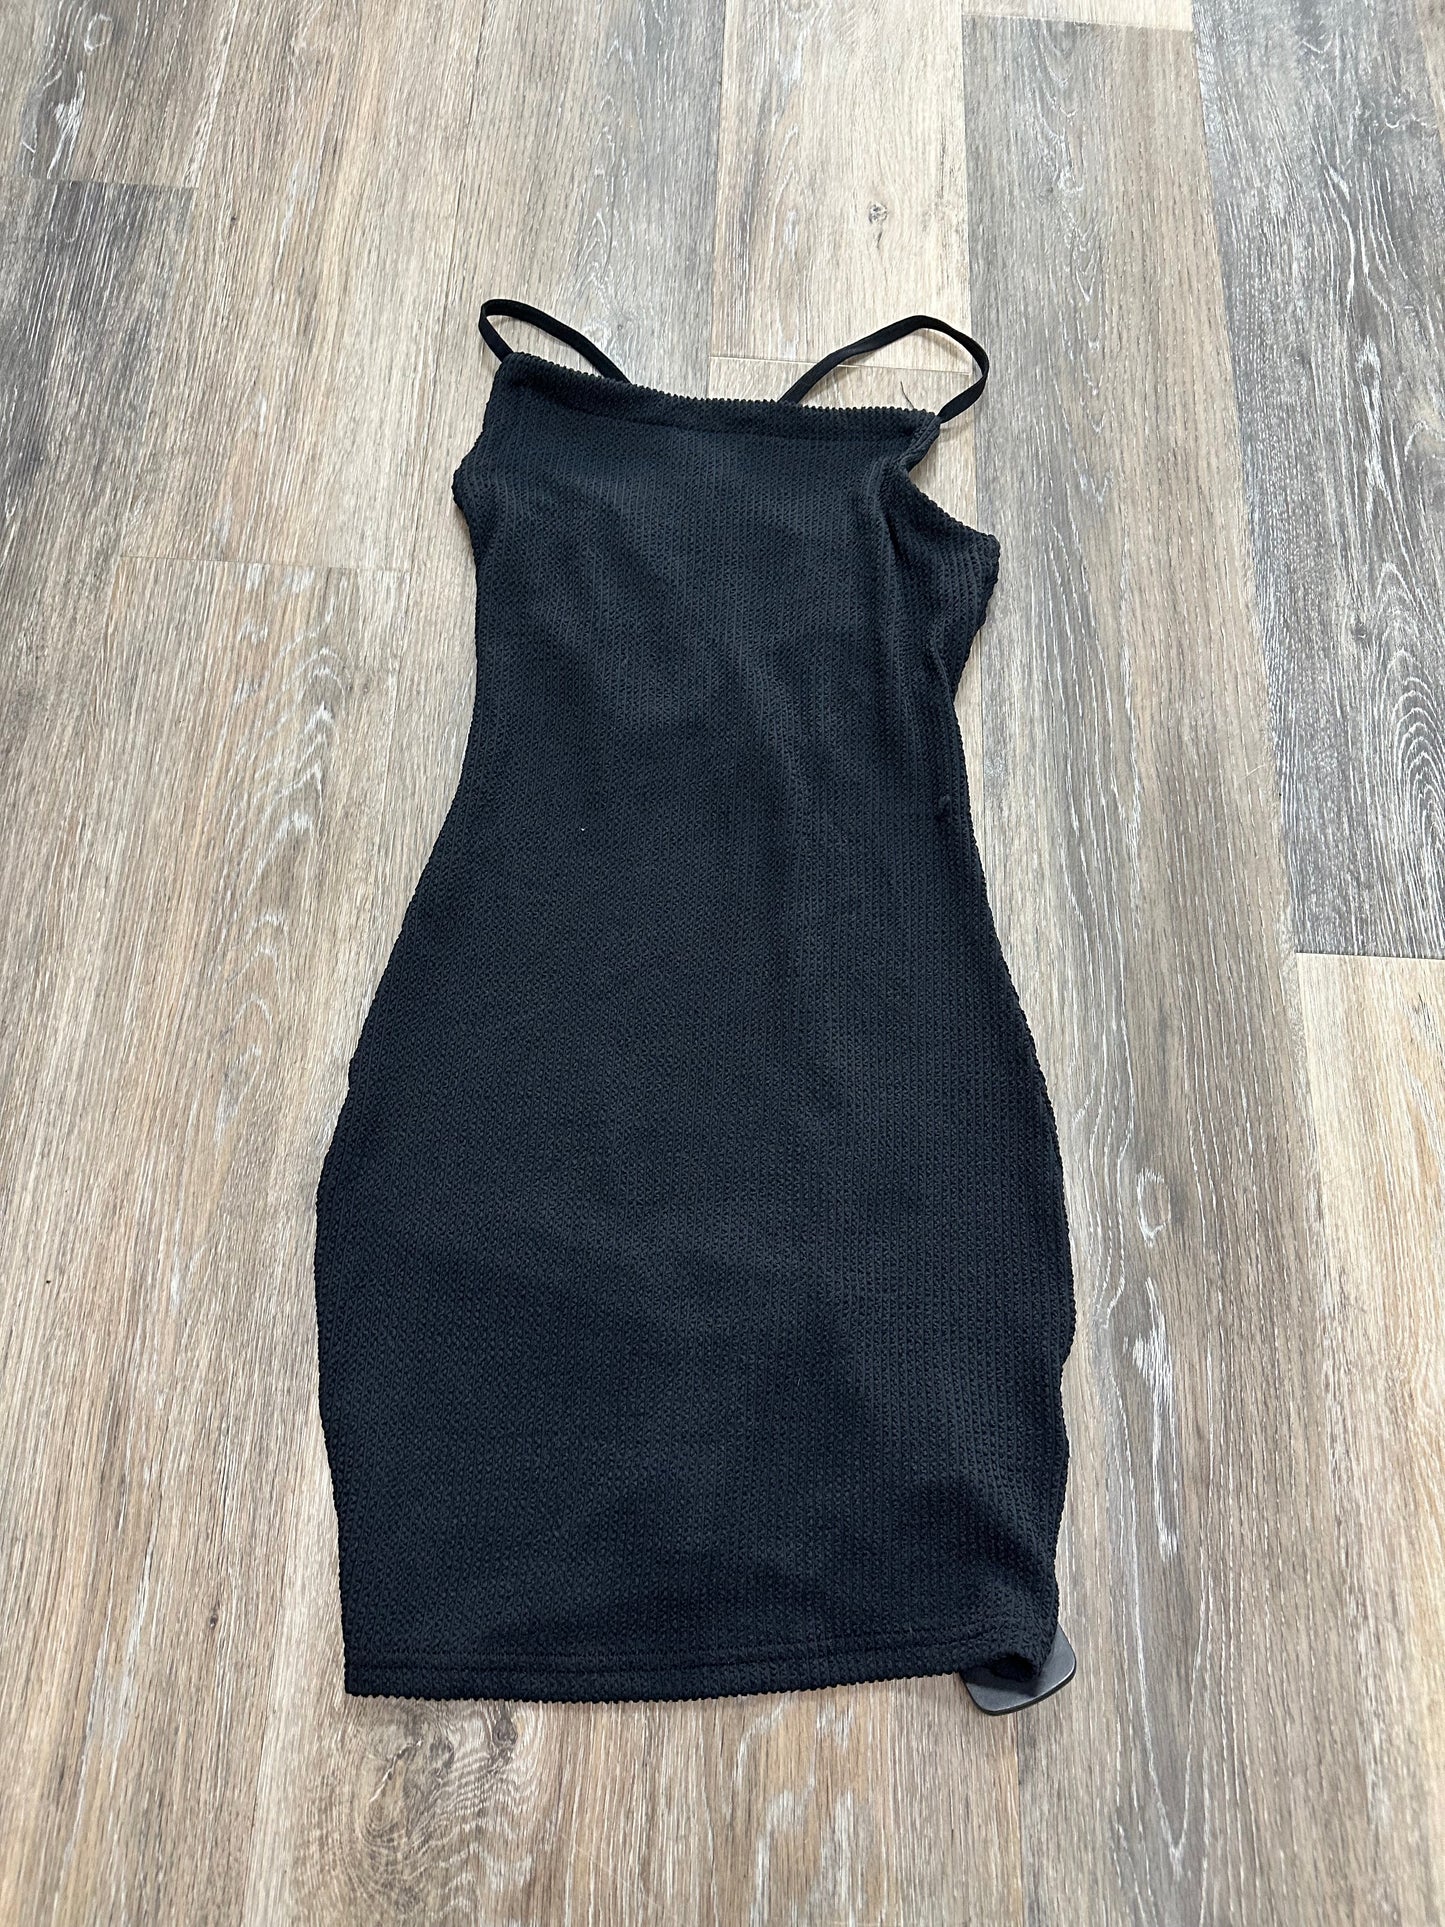 Dress Casual Short By Urban Outfitters  Size: Xs